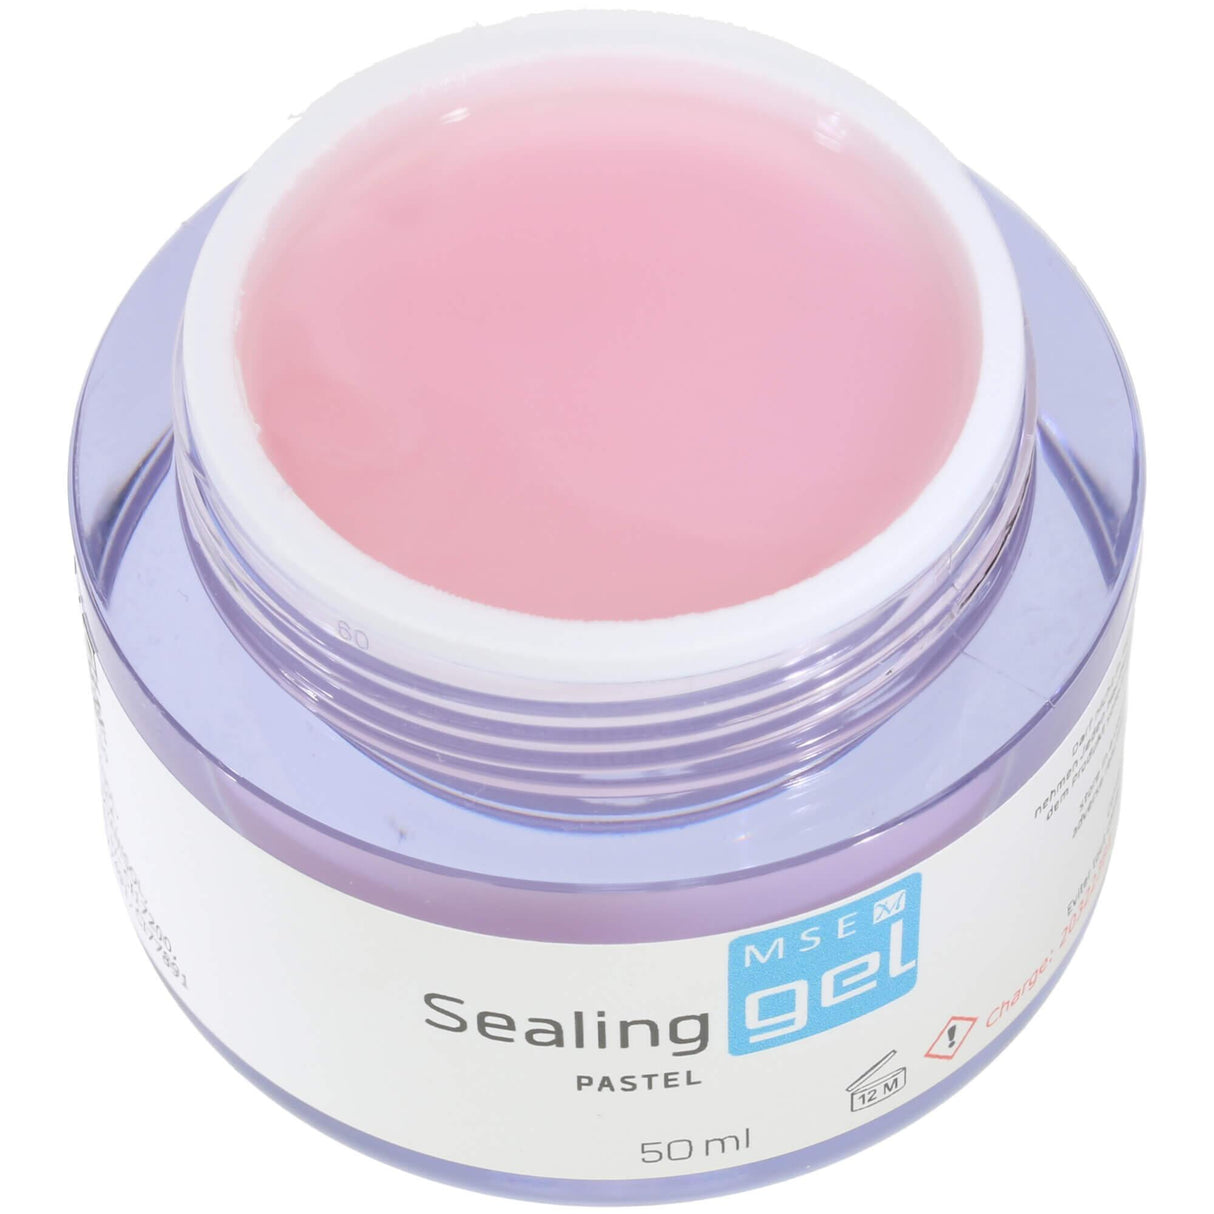 MSE Gel 409: Glanz Gel Pastell / Sealing pastel 50ml - MSE - The Beauty Company